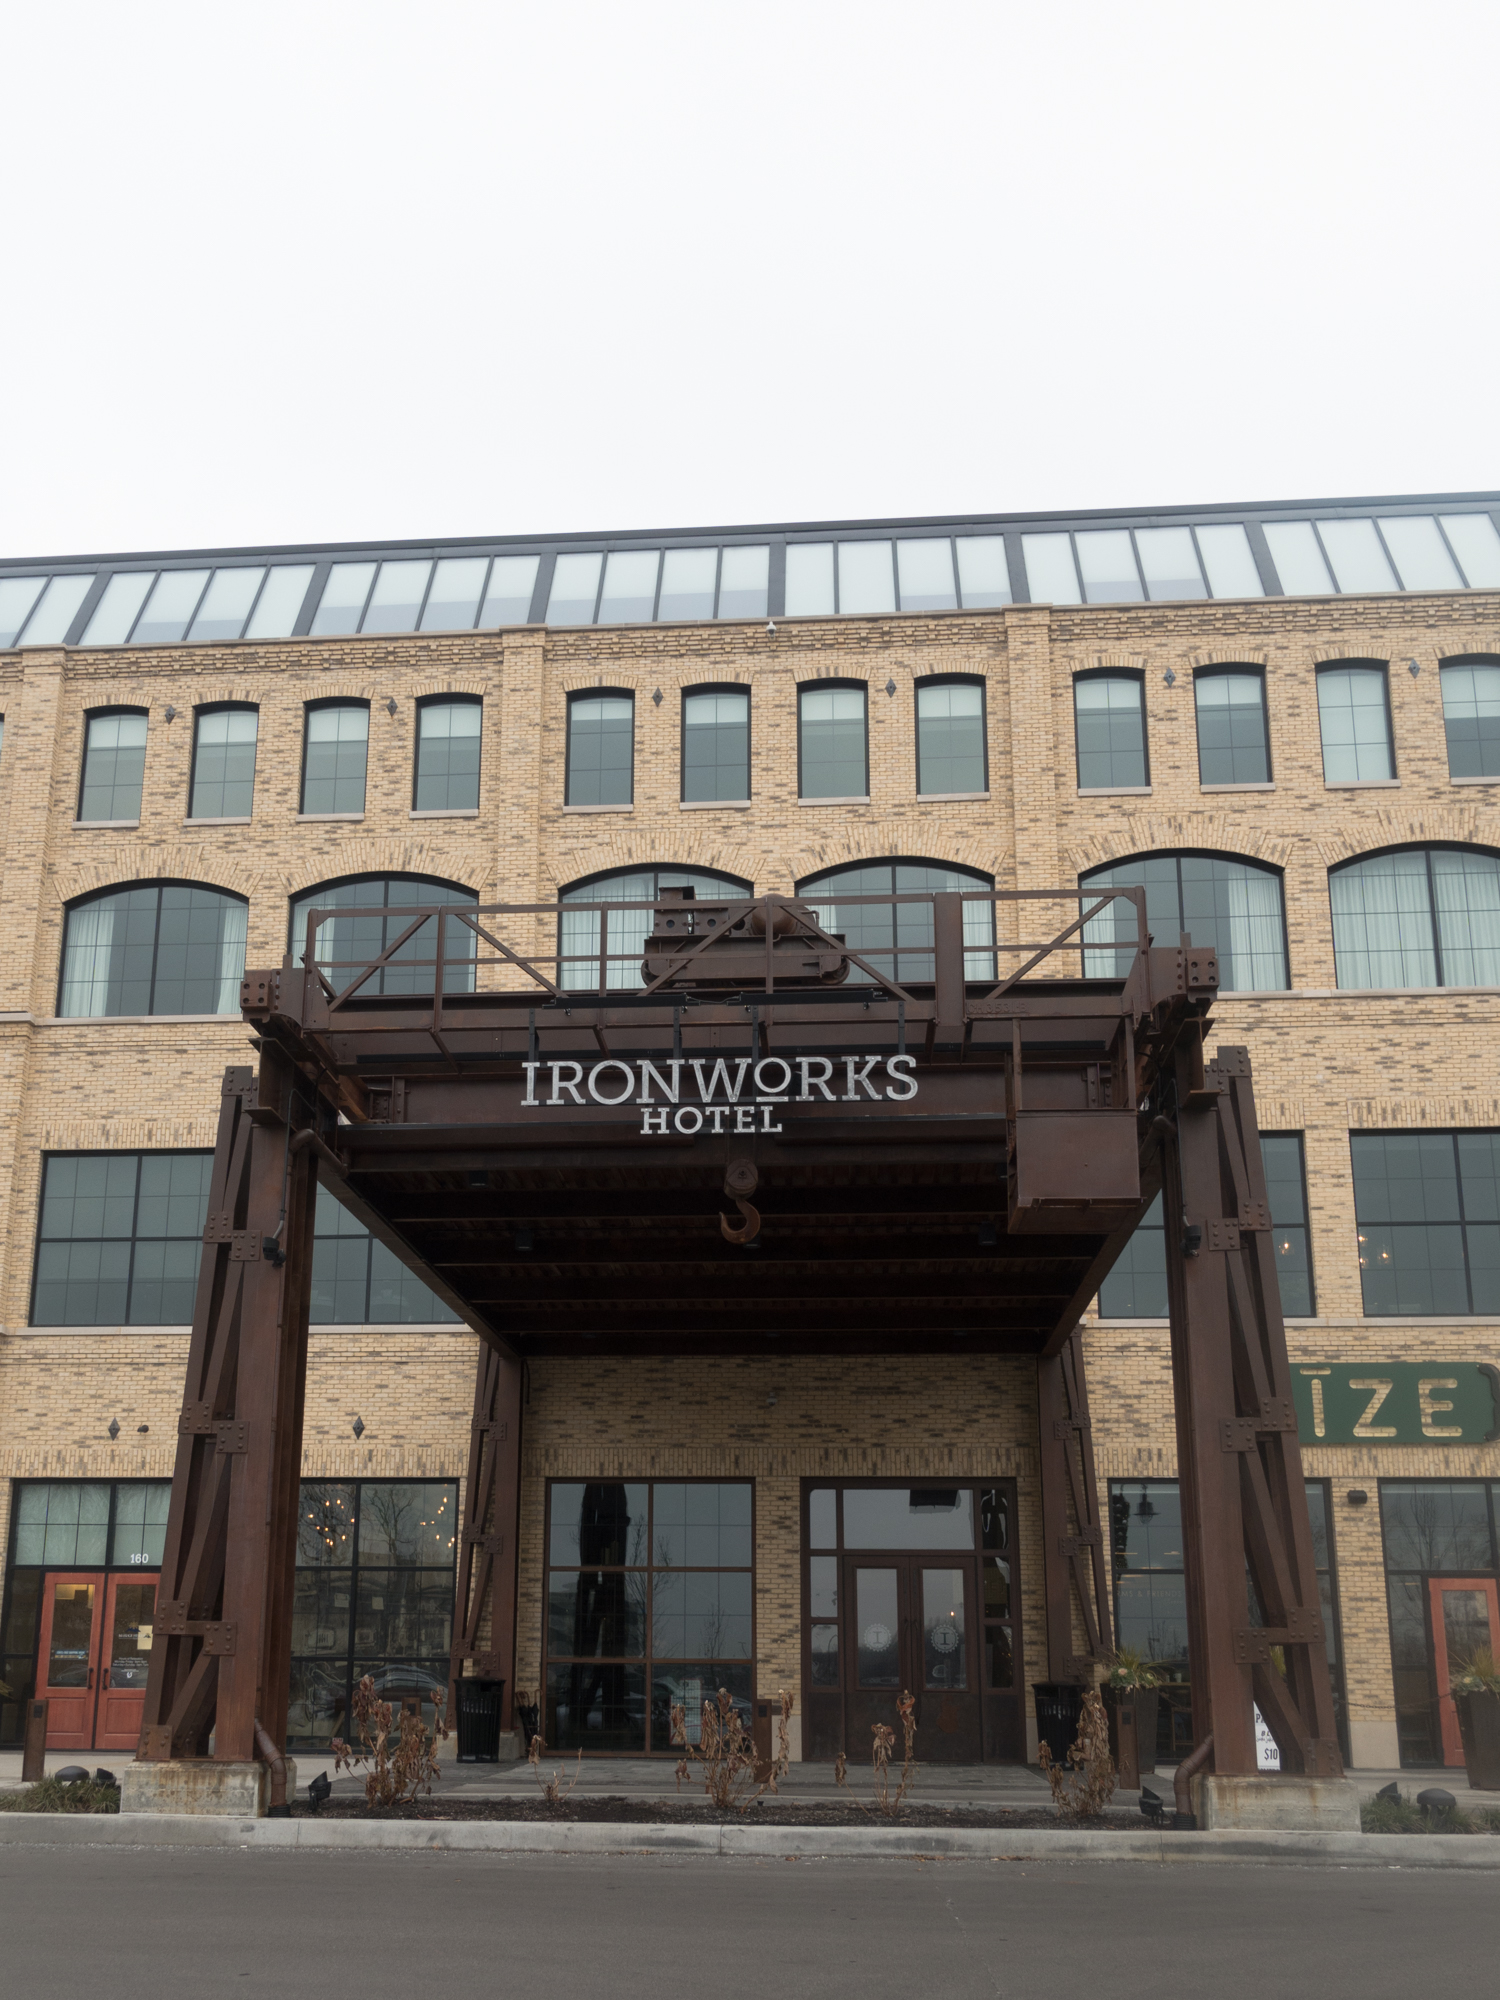 Located just North of Indianapolis, near the Keystone Fashion Mall, you'll discover touches industrial items throughout the Ironworks Hotel. If you are looking for a unique hotel in the Midwest, the Ironworks Hotel just might be the perfect boutique hotel for you. #travel #Midwest #hotel #USA #Indiana #boutique #luxury 